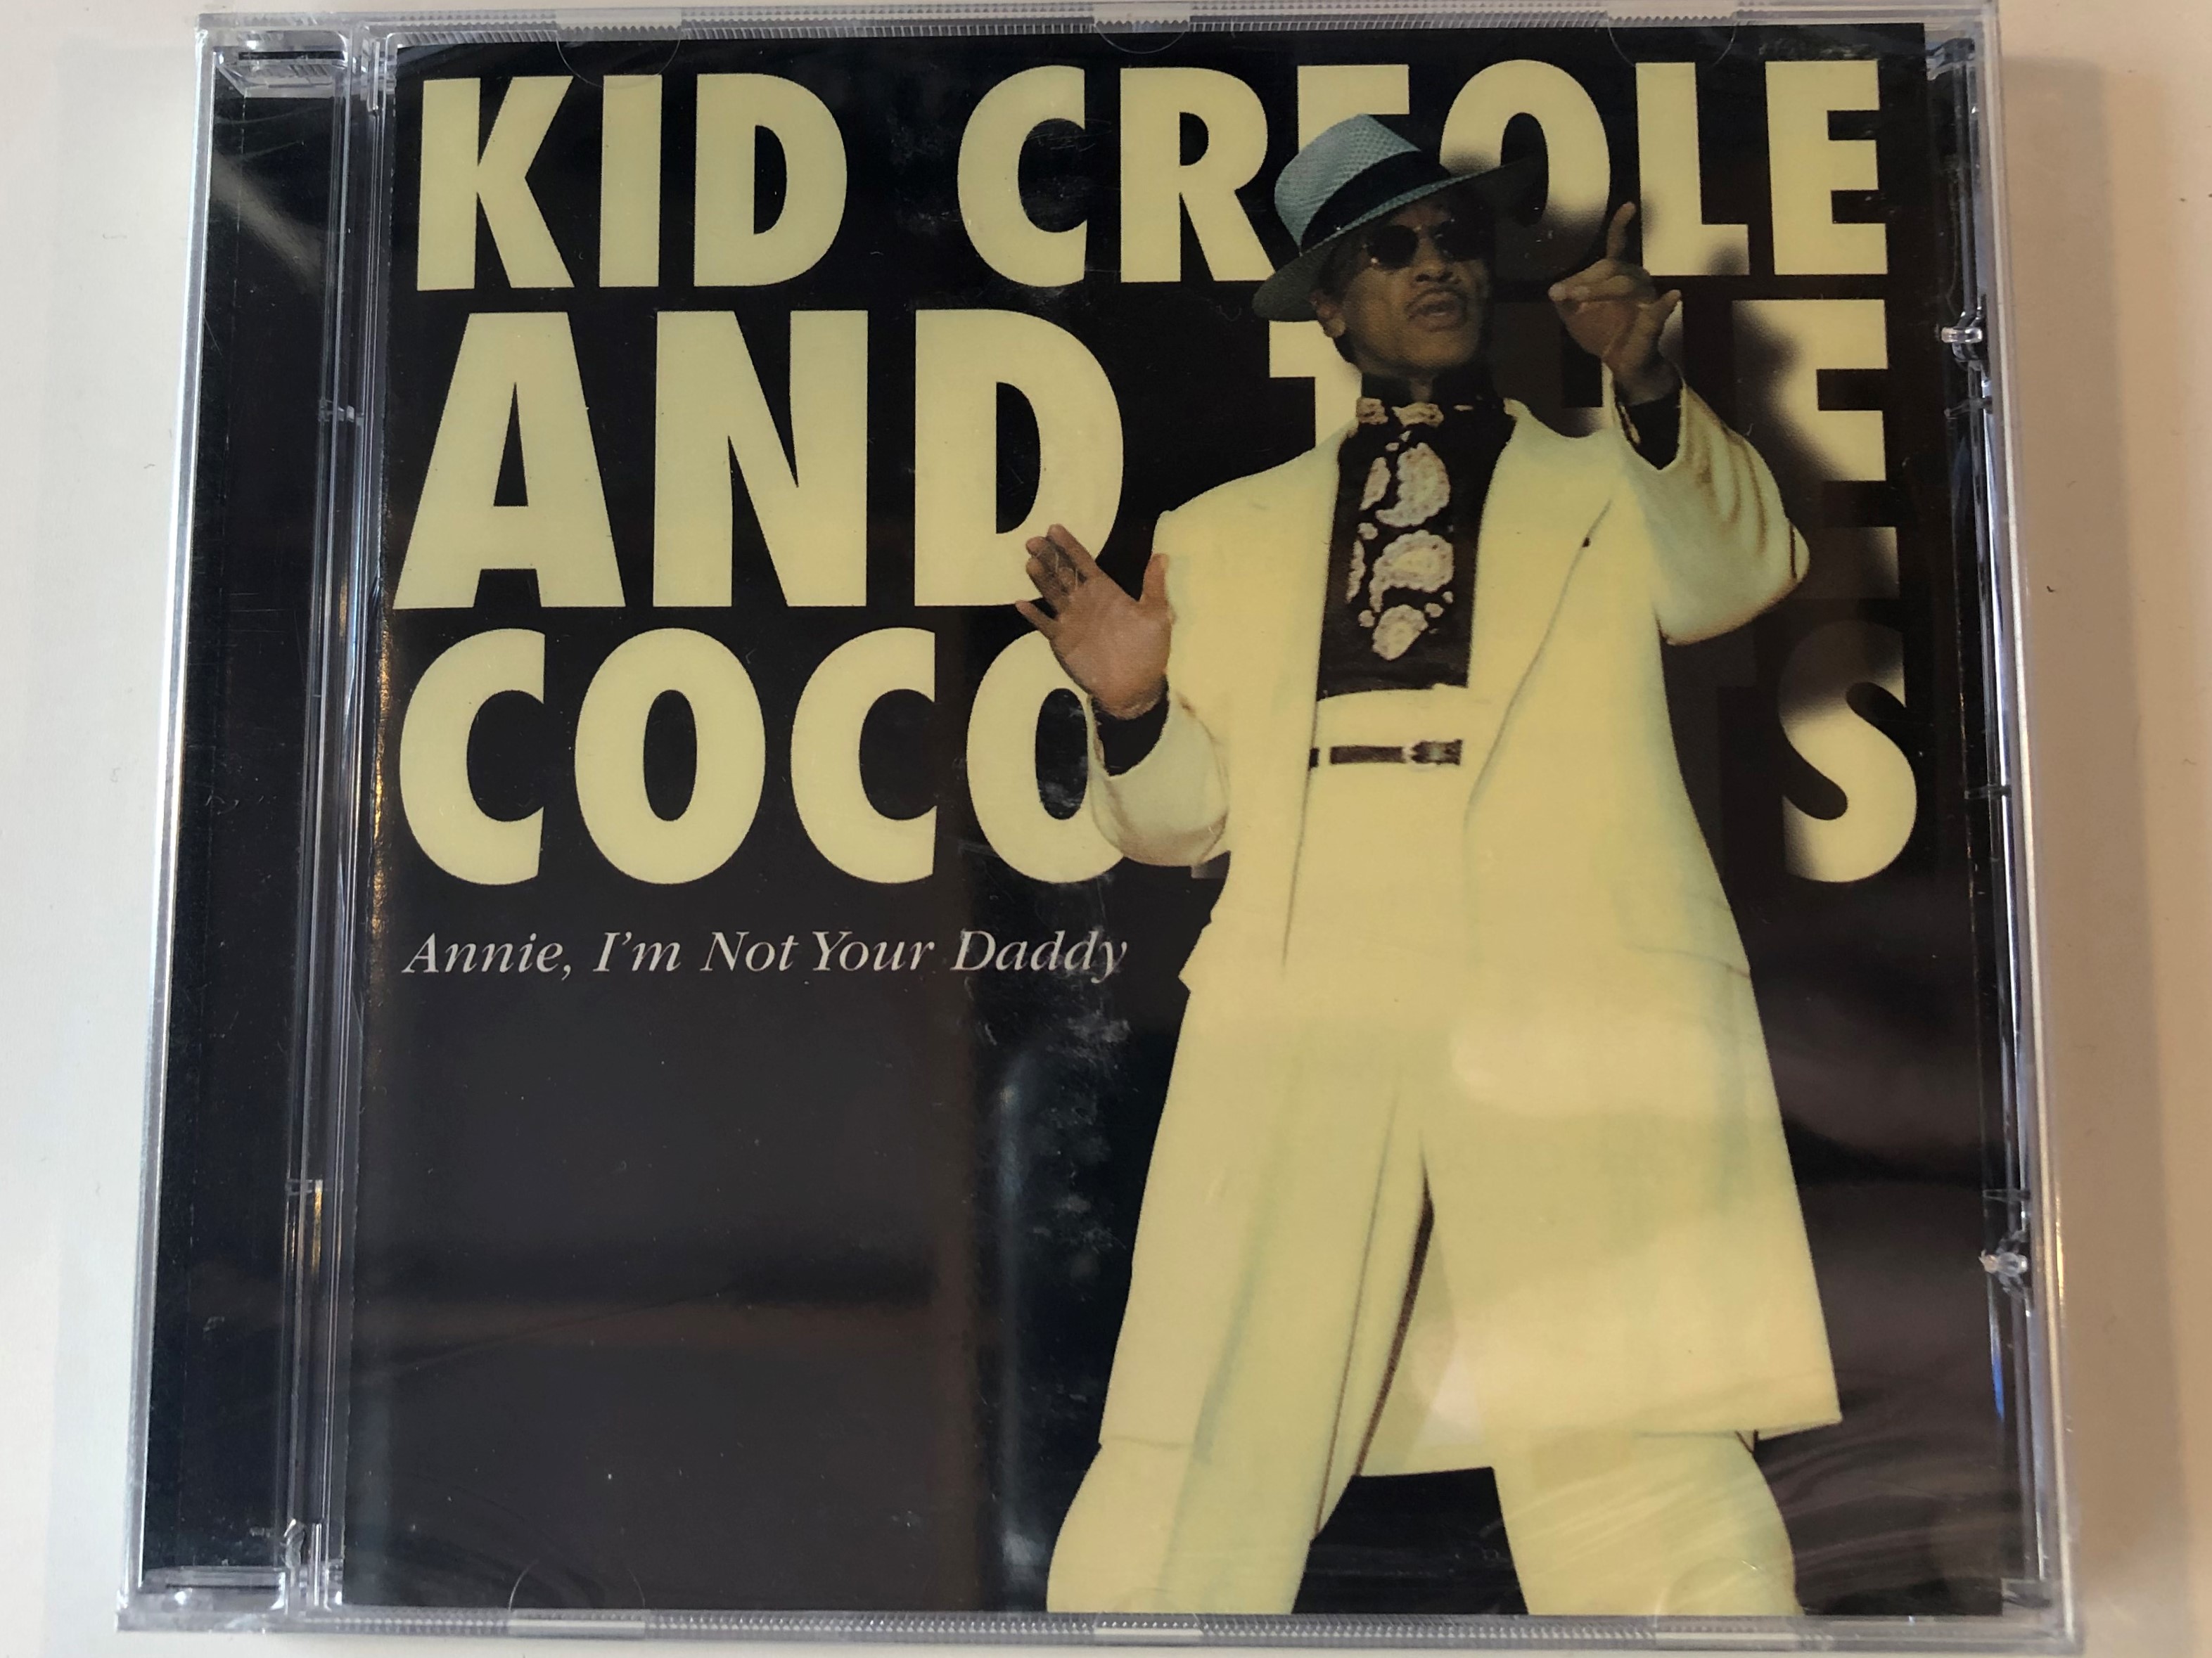 kid-creole-and-the-coconuts-annie-i-m-not-your-daddy-elap-music-audio-cd-2001-5706238310663-1-.jpg